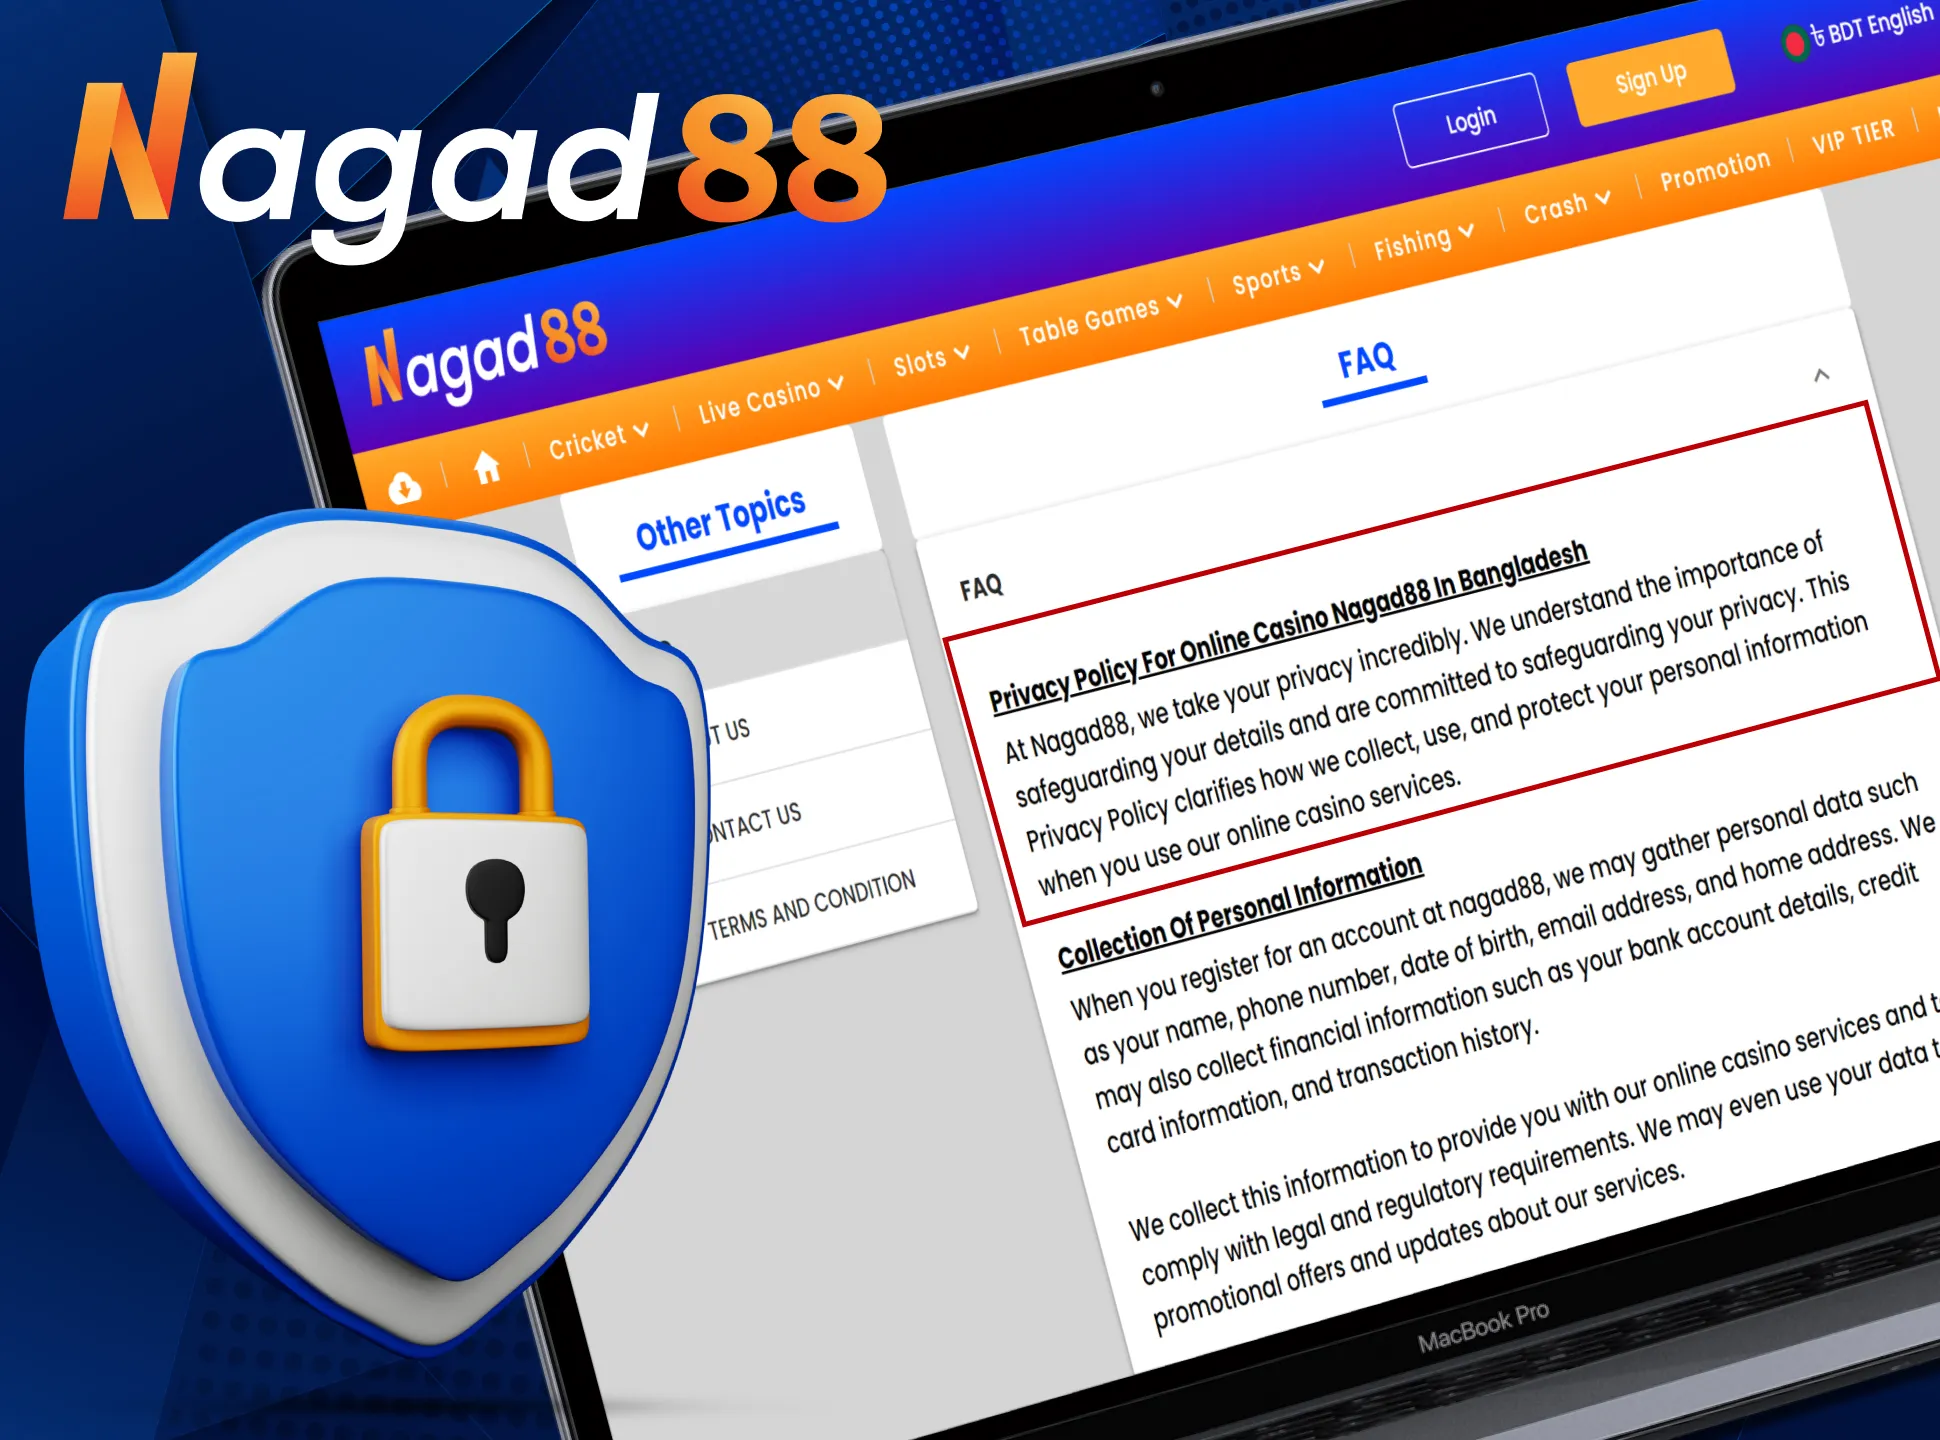 Get acquainted with Nagad88's privacy policy.